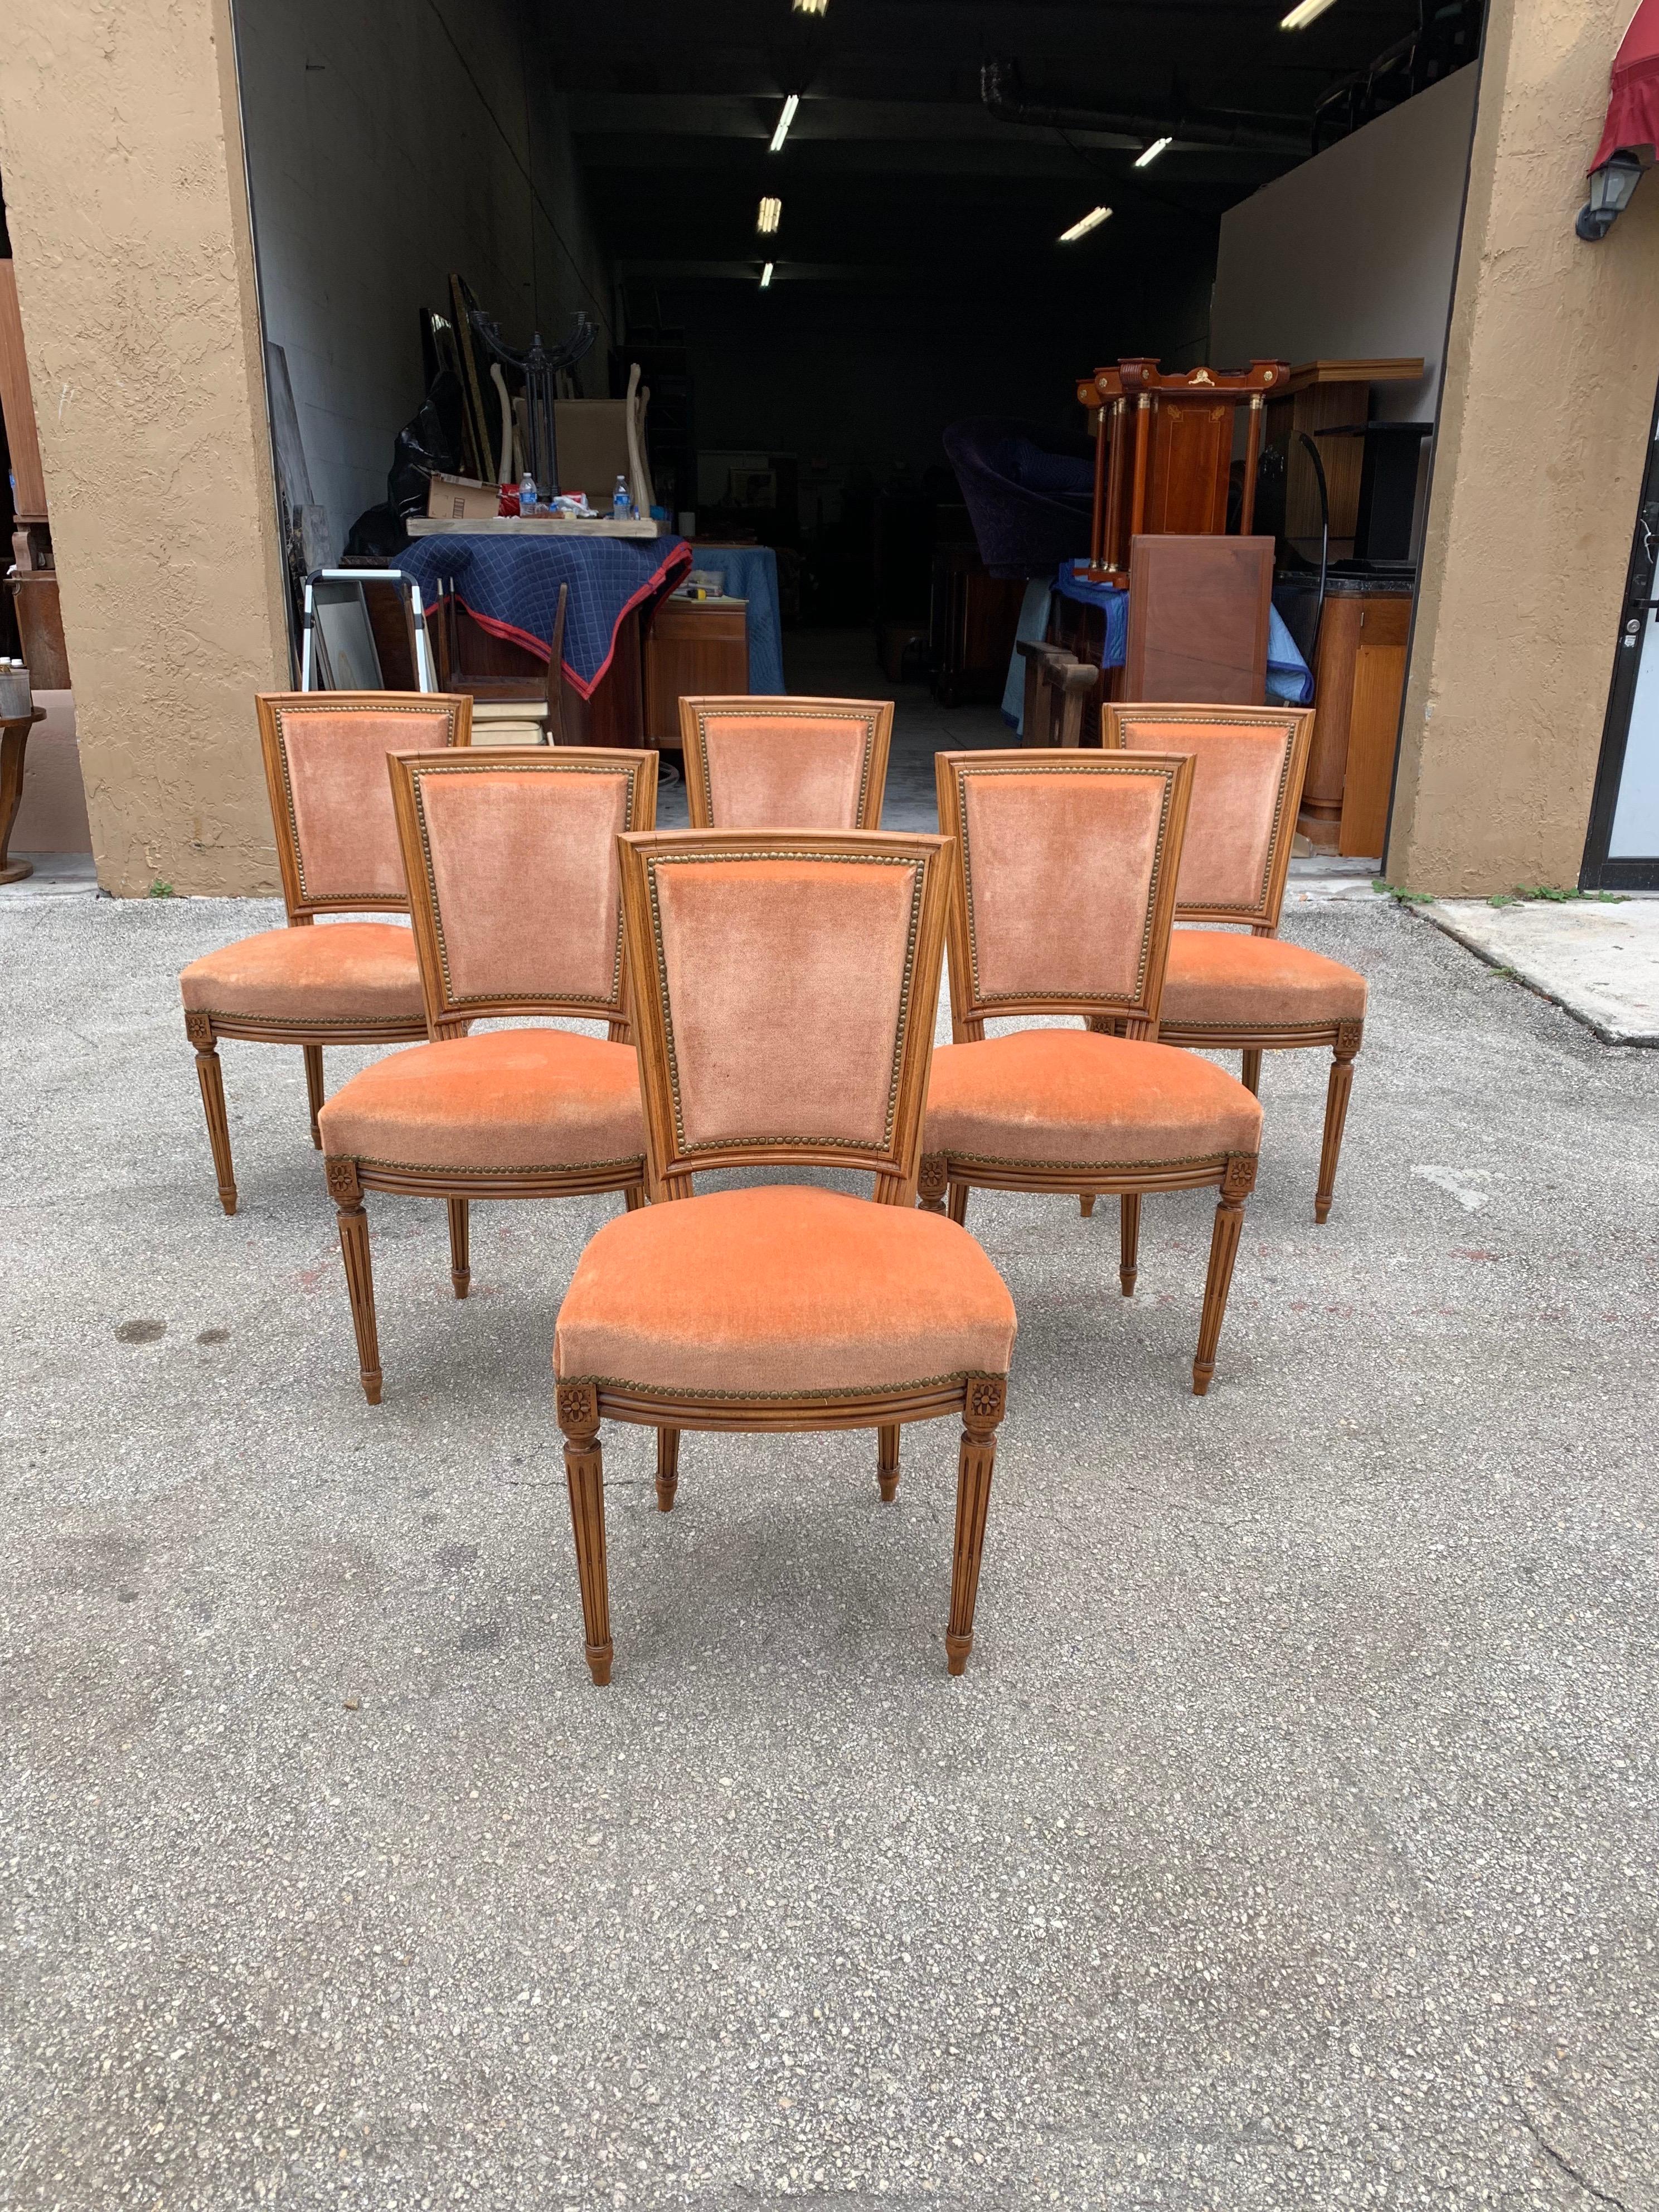 Fine set of six French Louis XVl dining chairs solid mahogany with peach color velvet, chair mahogany frames is in excellent condition. The reupholstery is original peach velvet color in very good condition all 6 dining chairs and very sturdy.